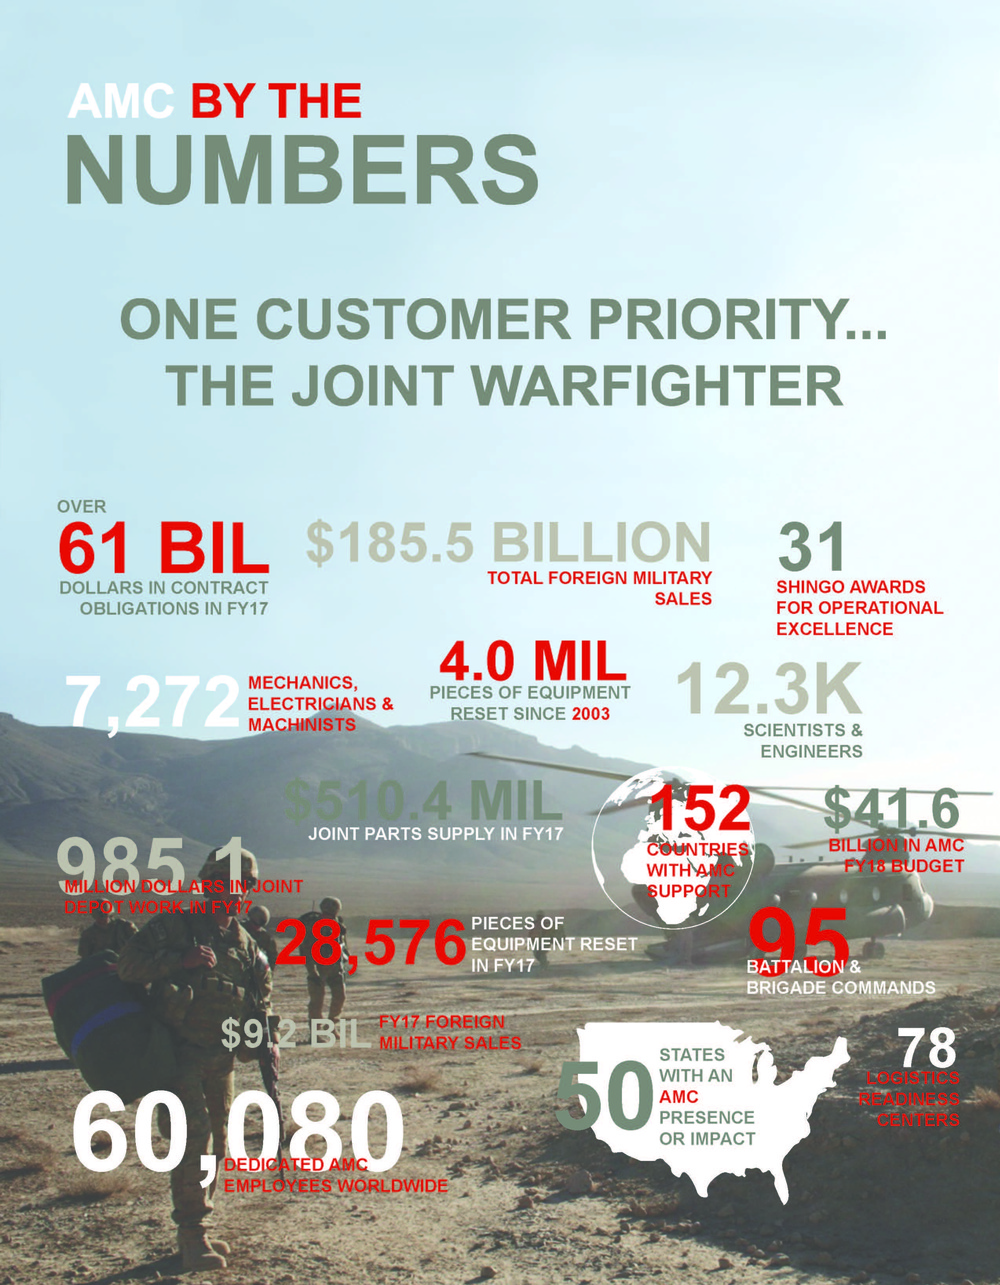 AMC By the Numbers